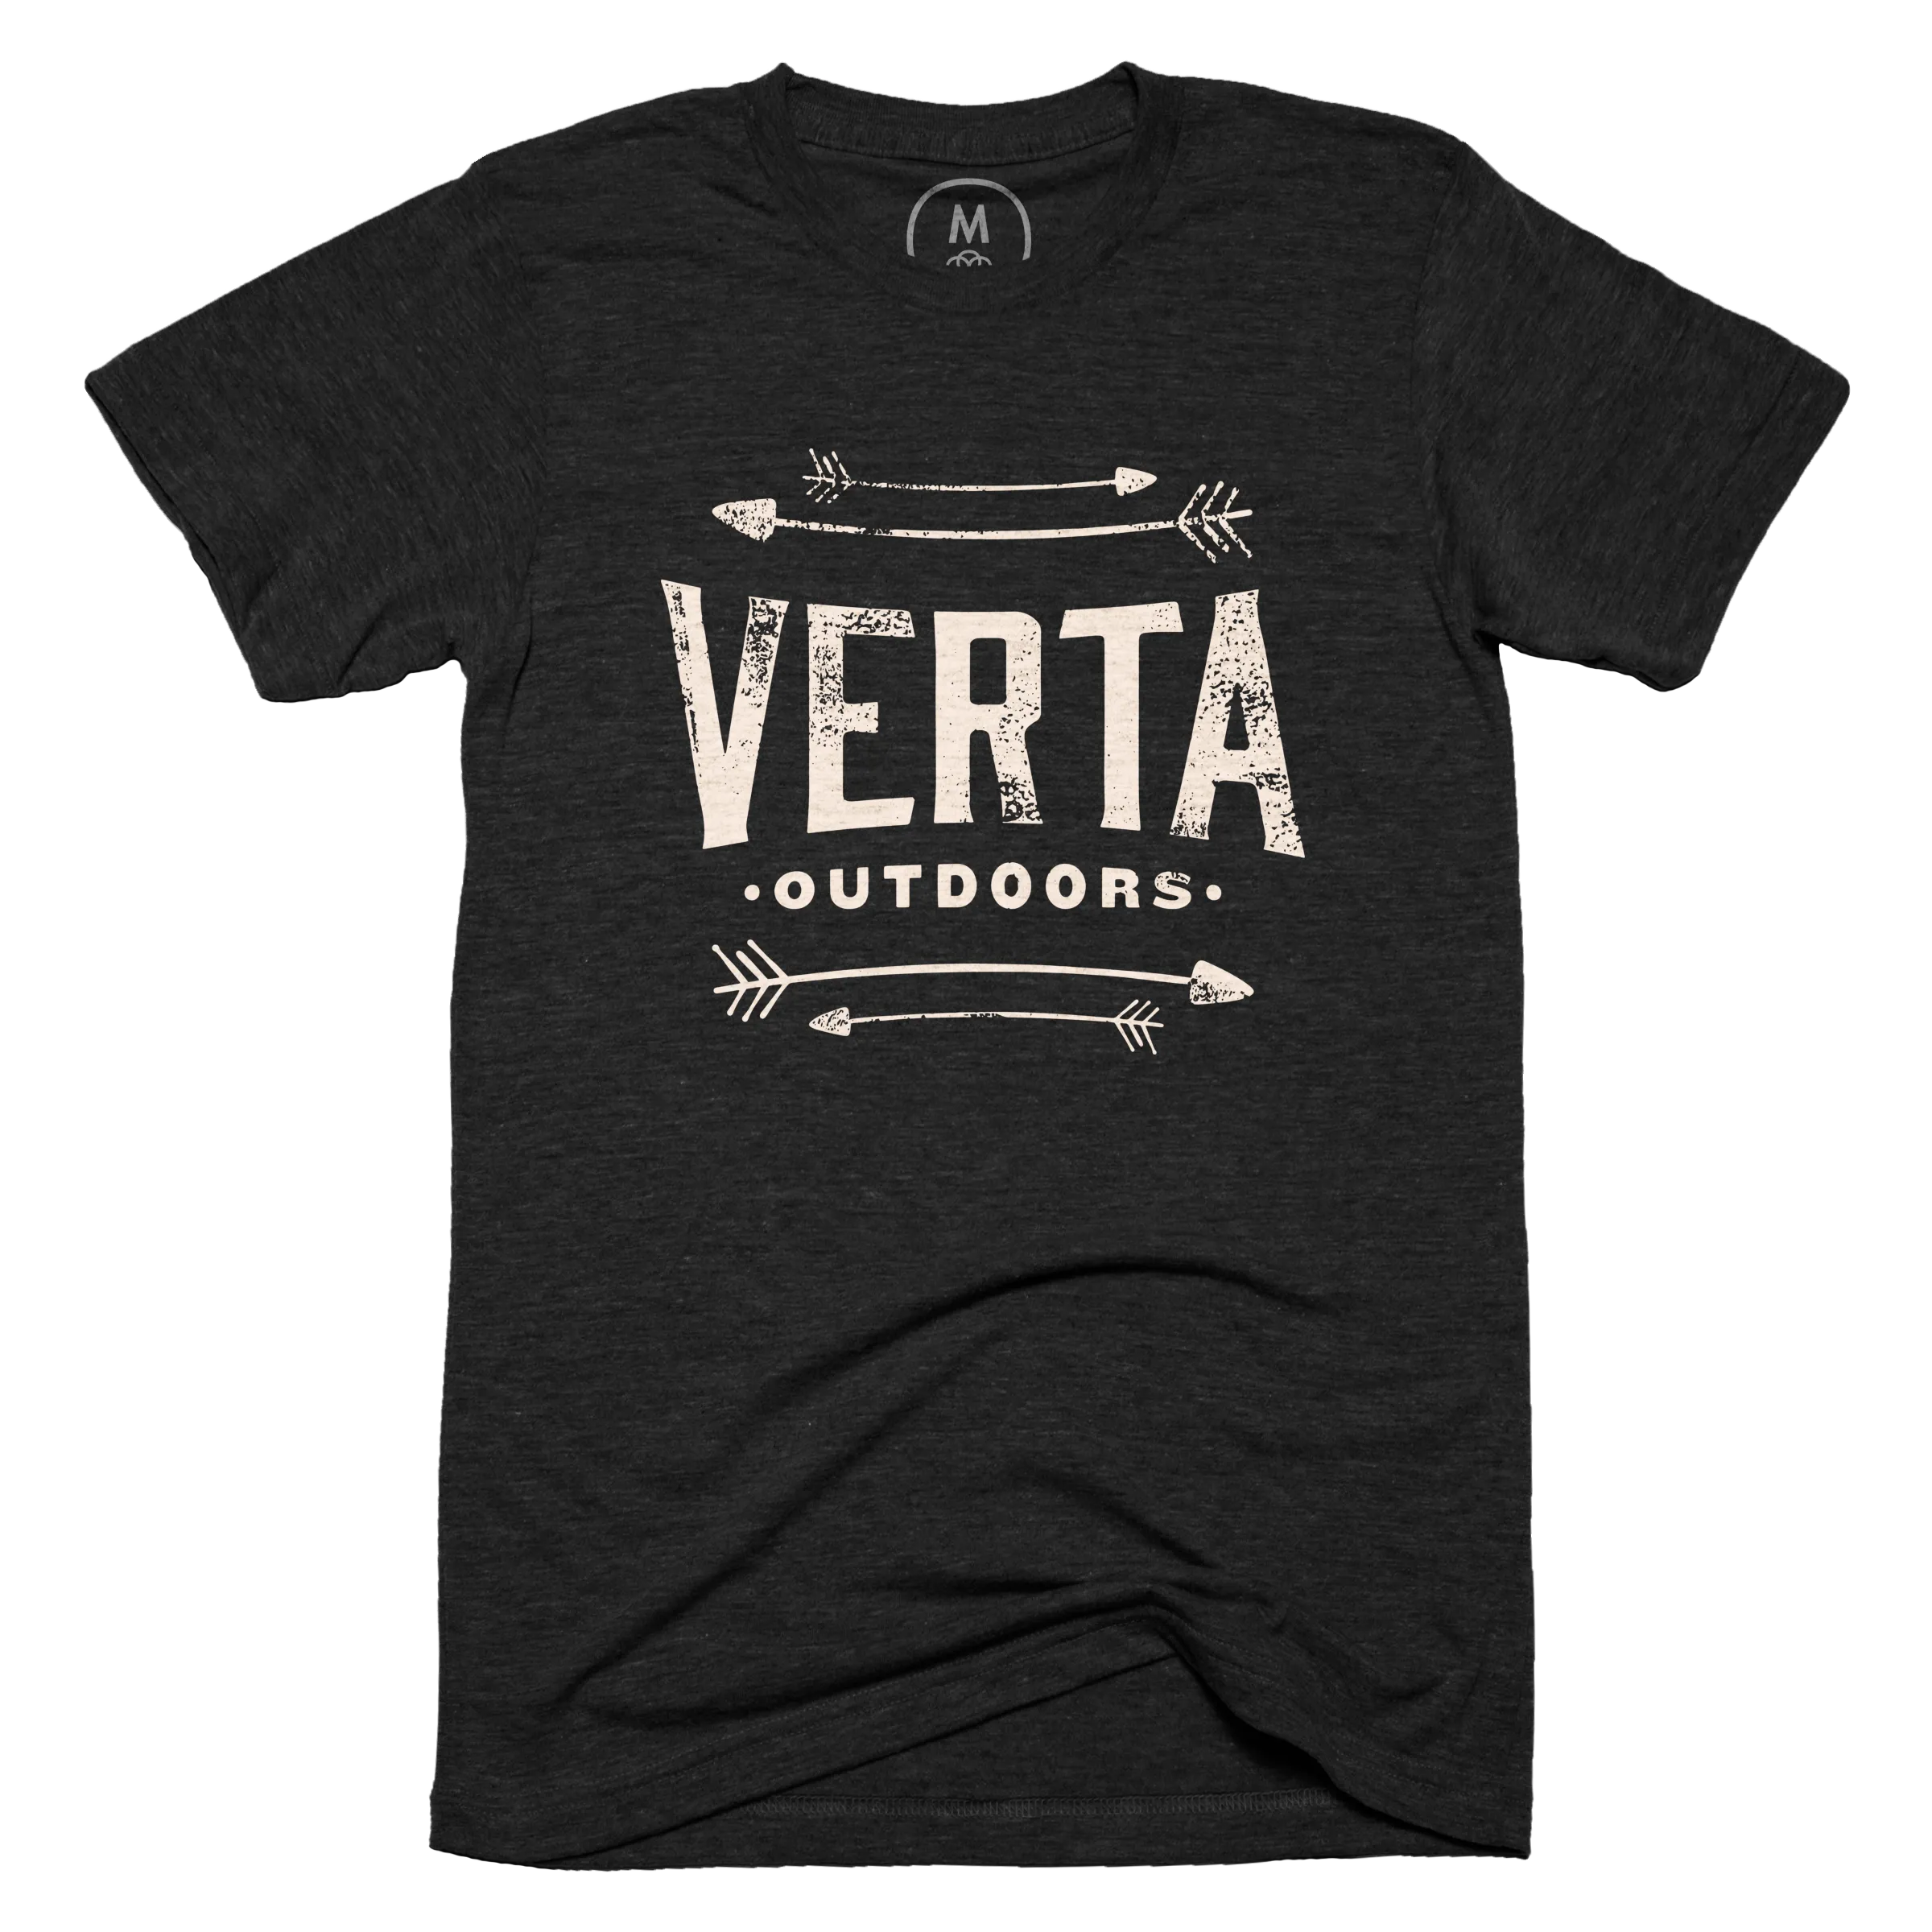 Verta Outdoors” graphic tee, pullover crewneck, pullover hoodie, tank,  onesie, and long sleeve tee by The Tangleleg.